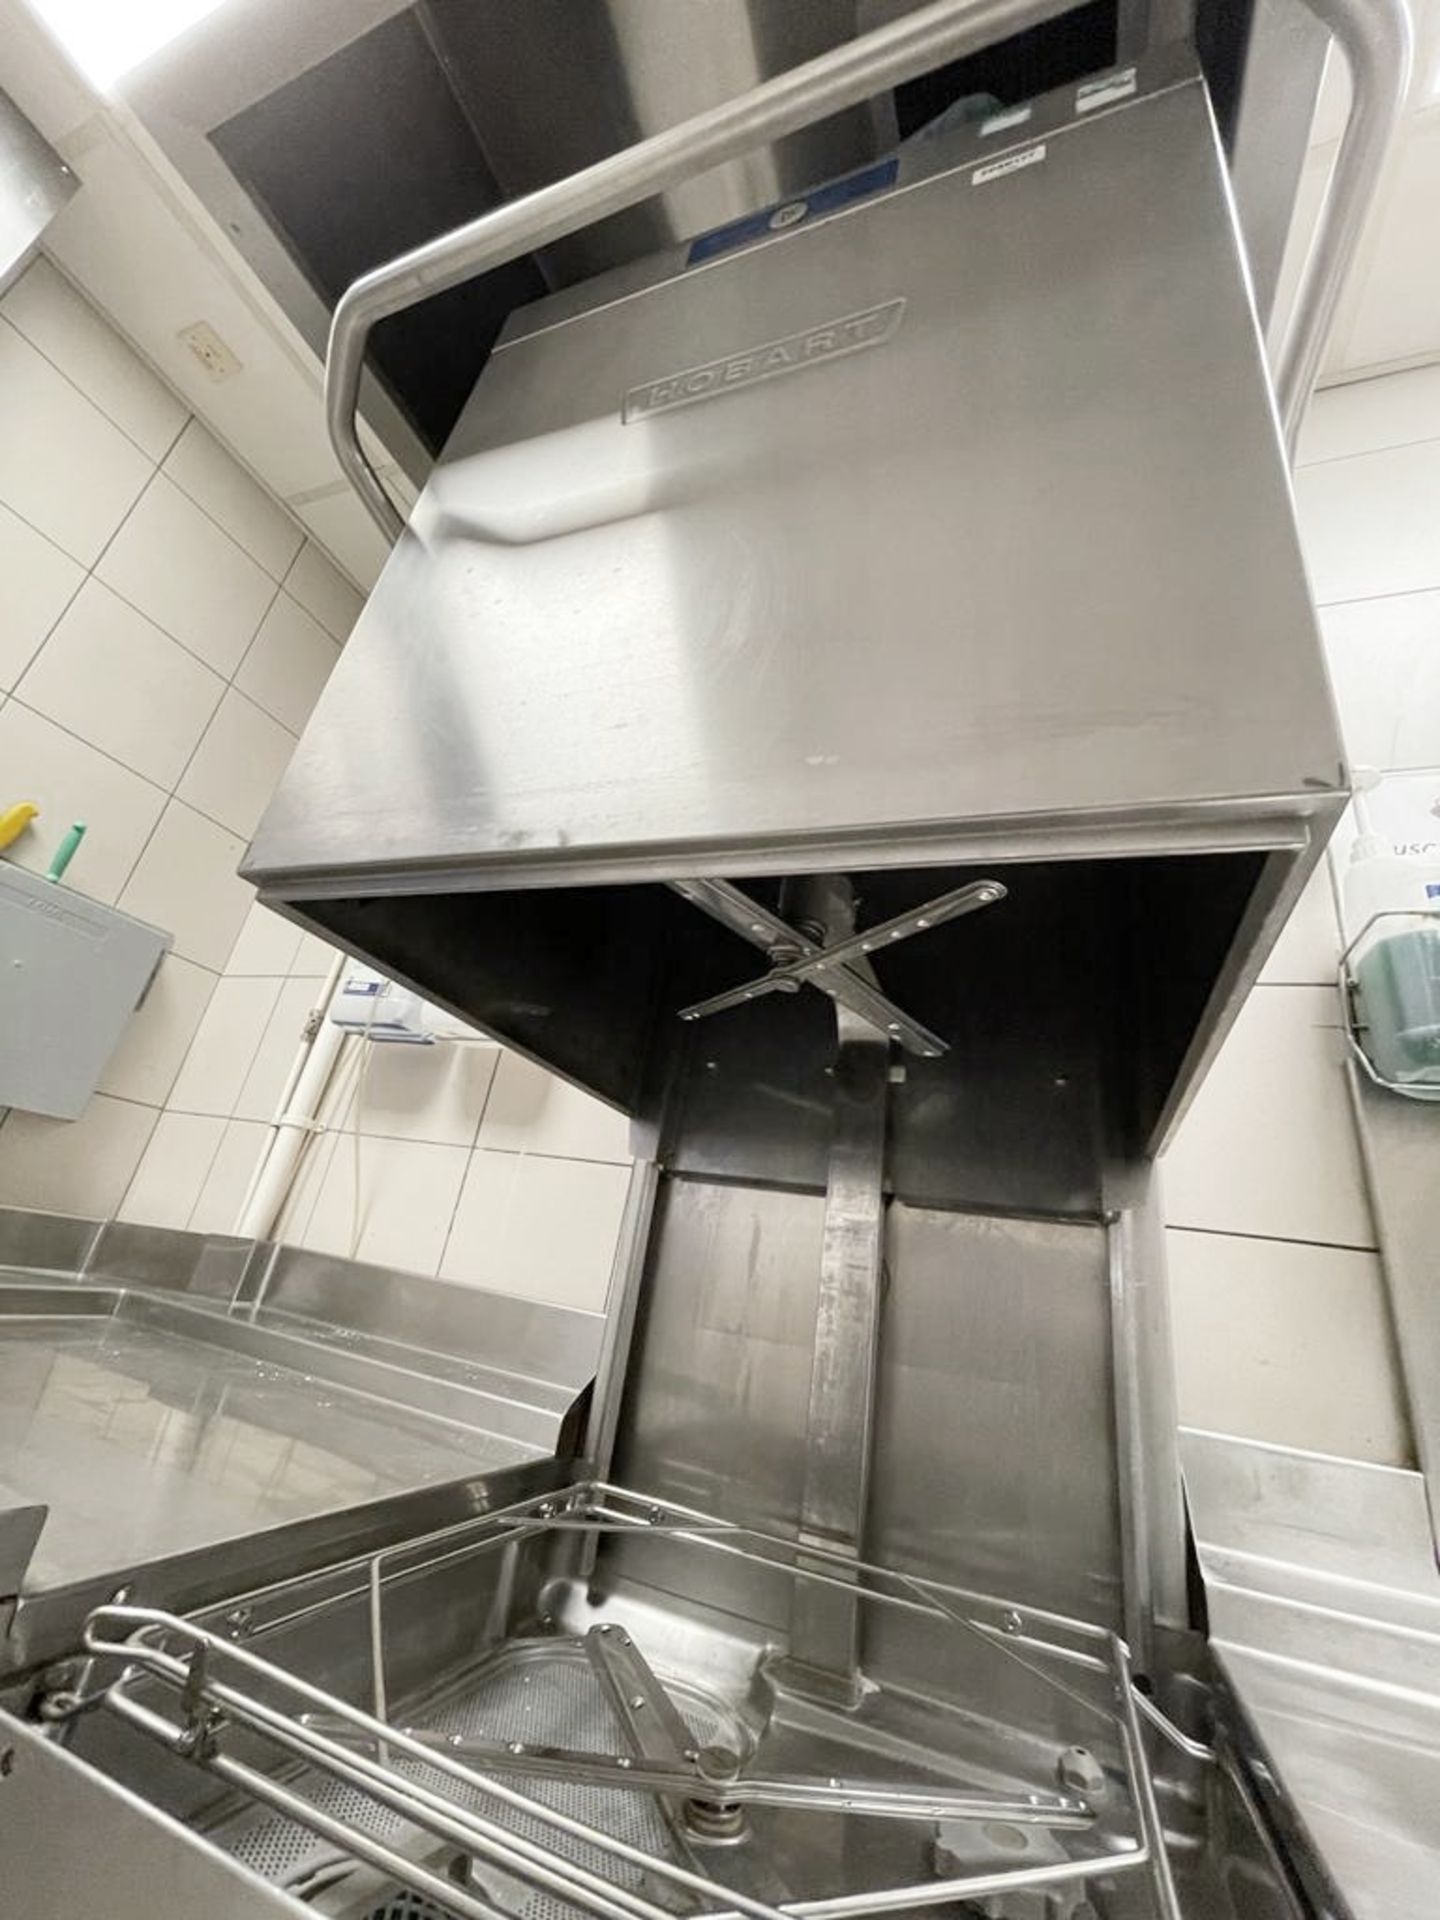 1 x HOBART Pass Through Dishwasher Wash Station With Pre-Rinse Spray Sink Unit and Drying Bench - Image 8 of 12